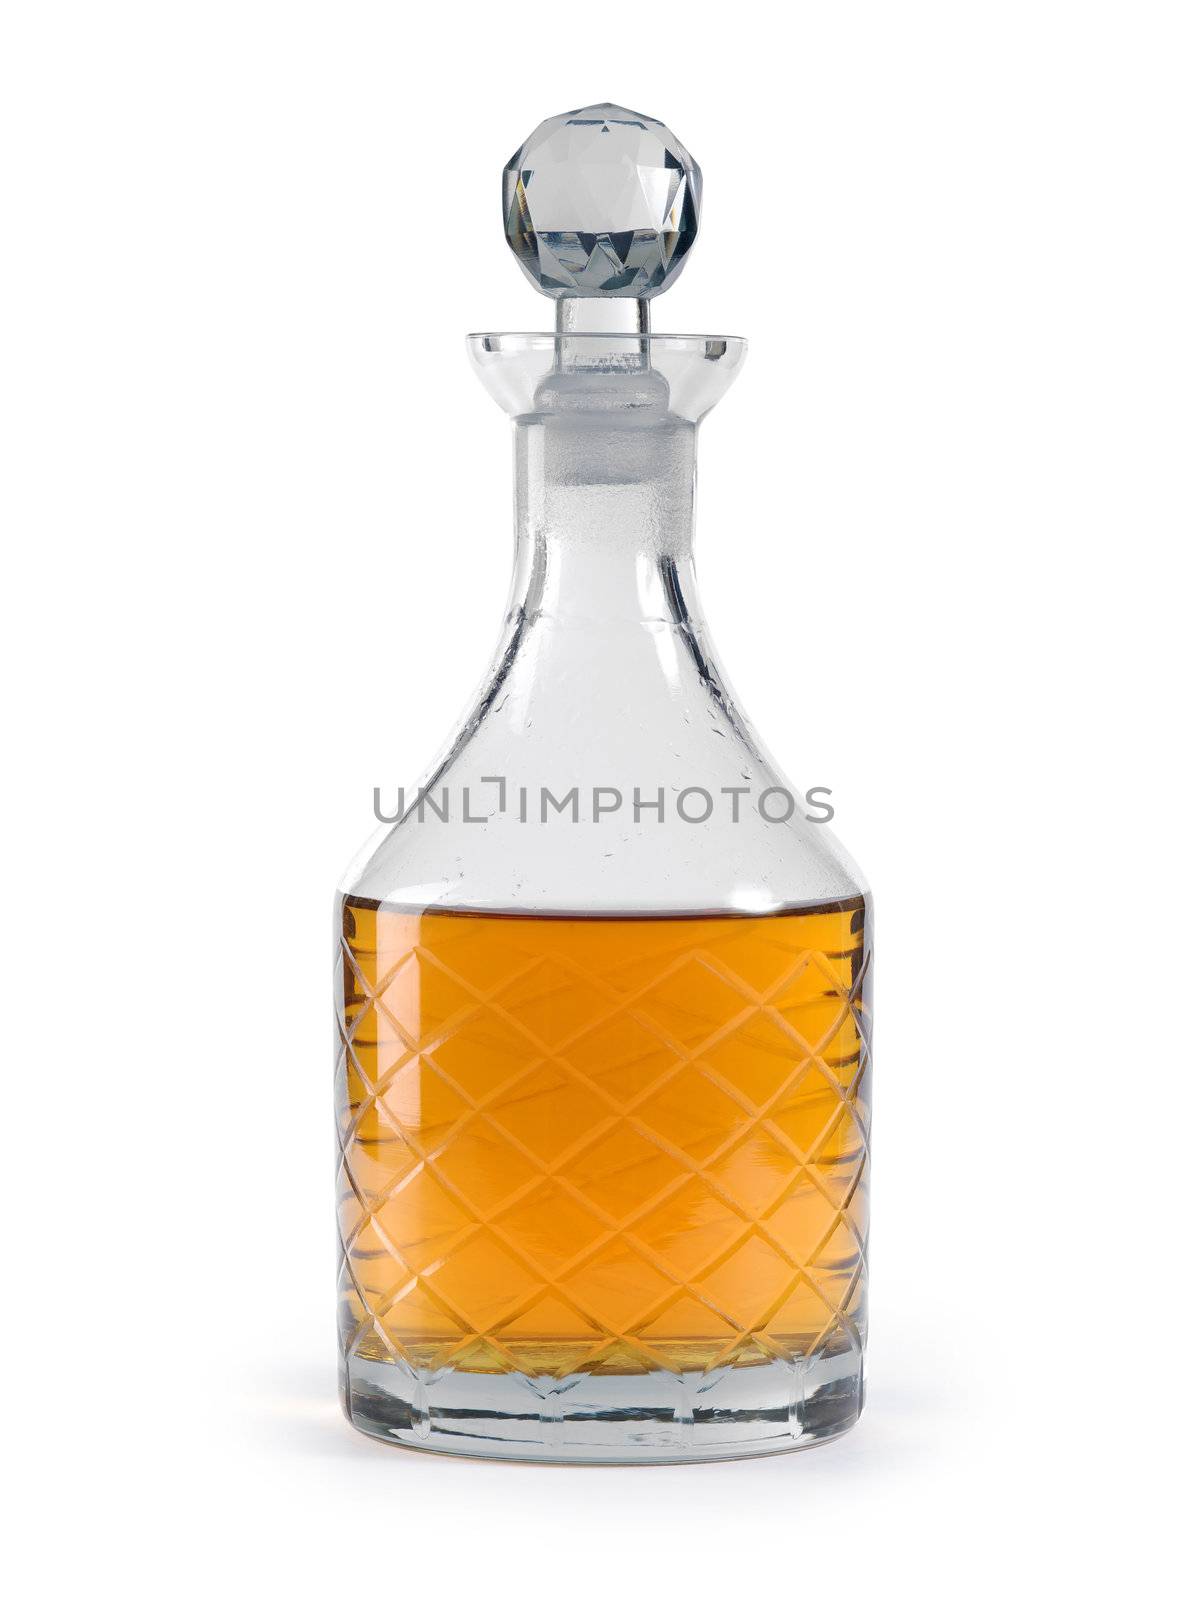 Photo of a isolated whisky decanter. Clipping path included.